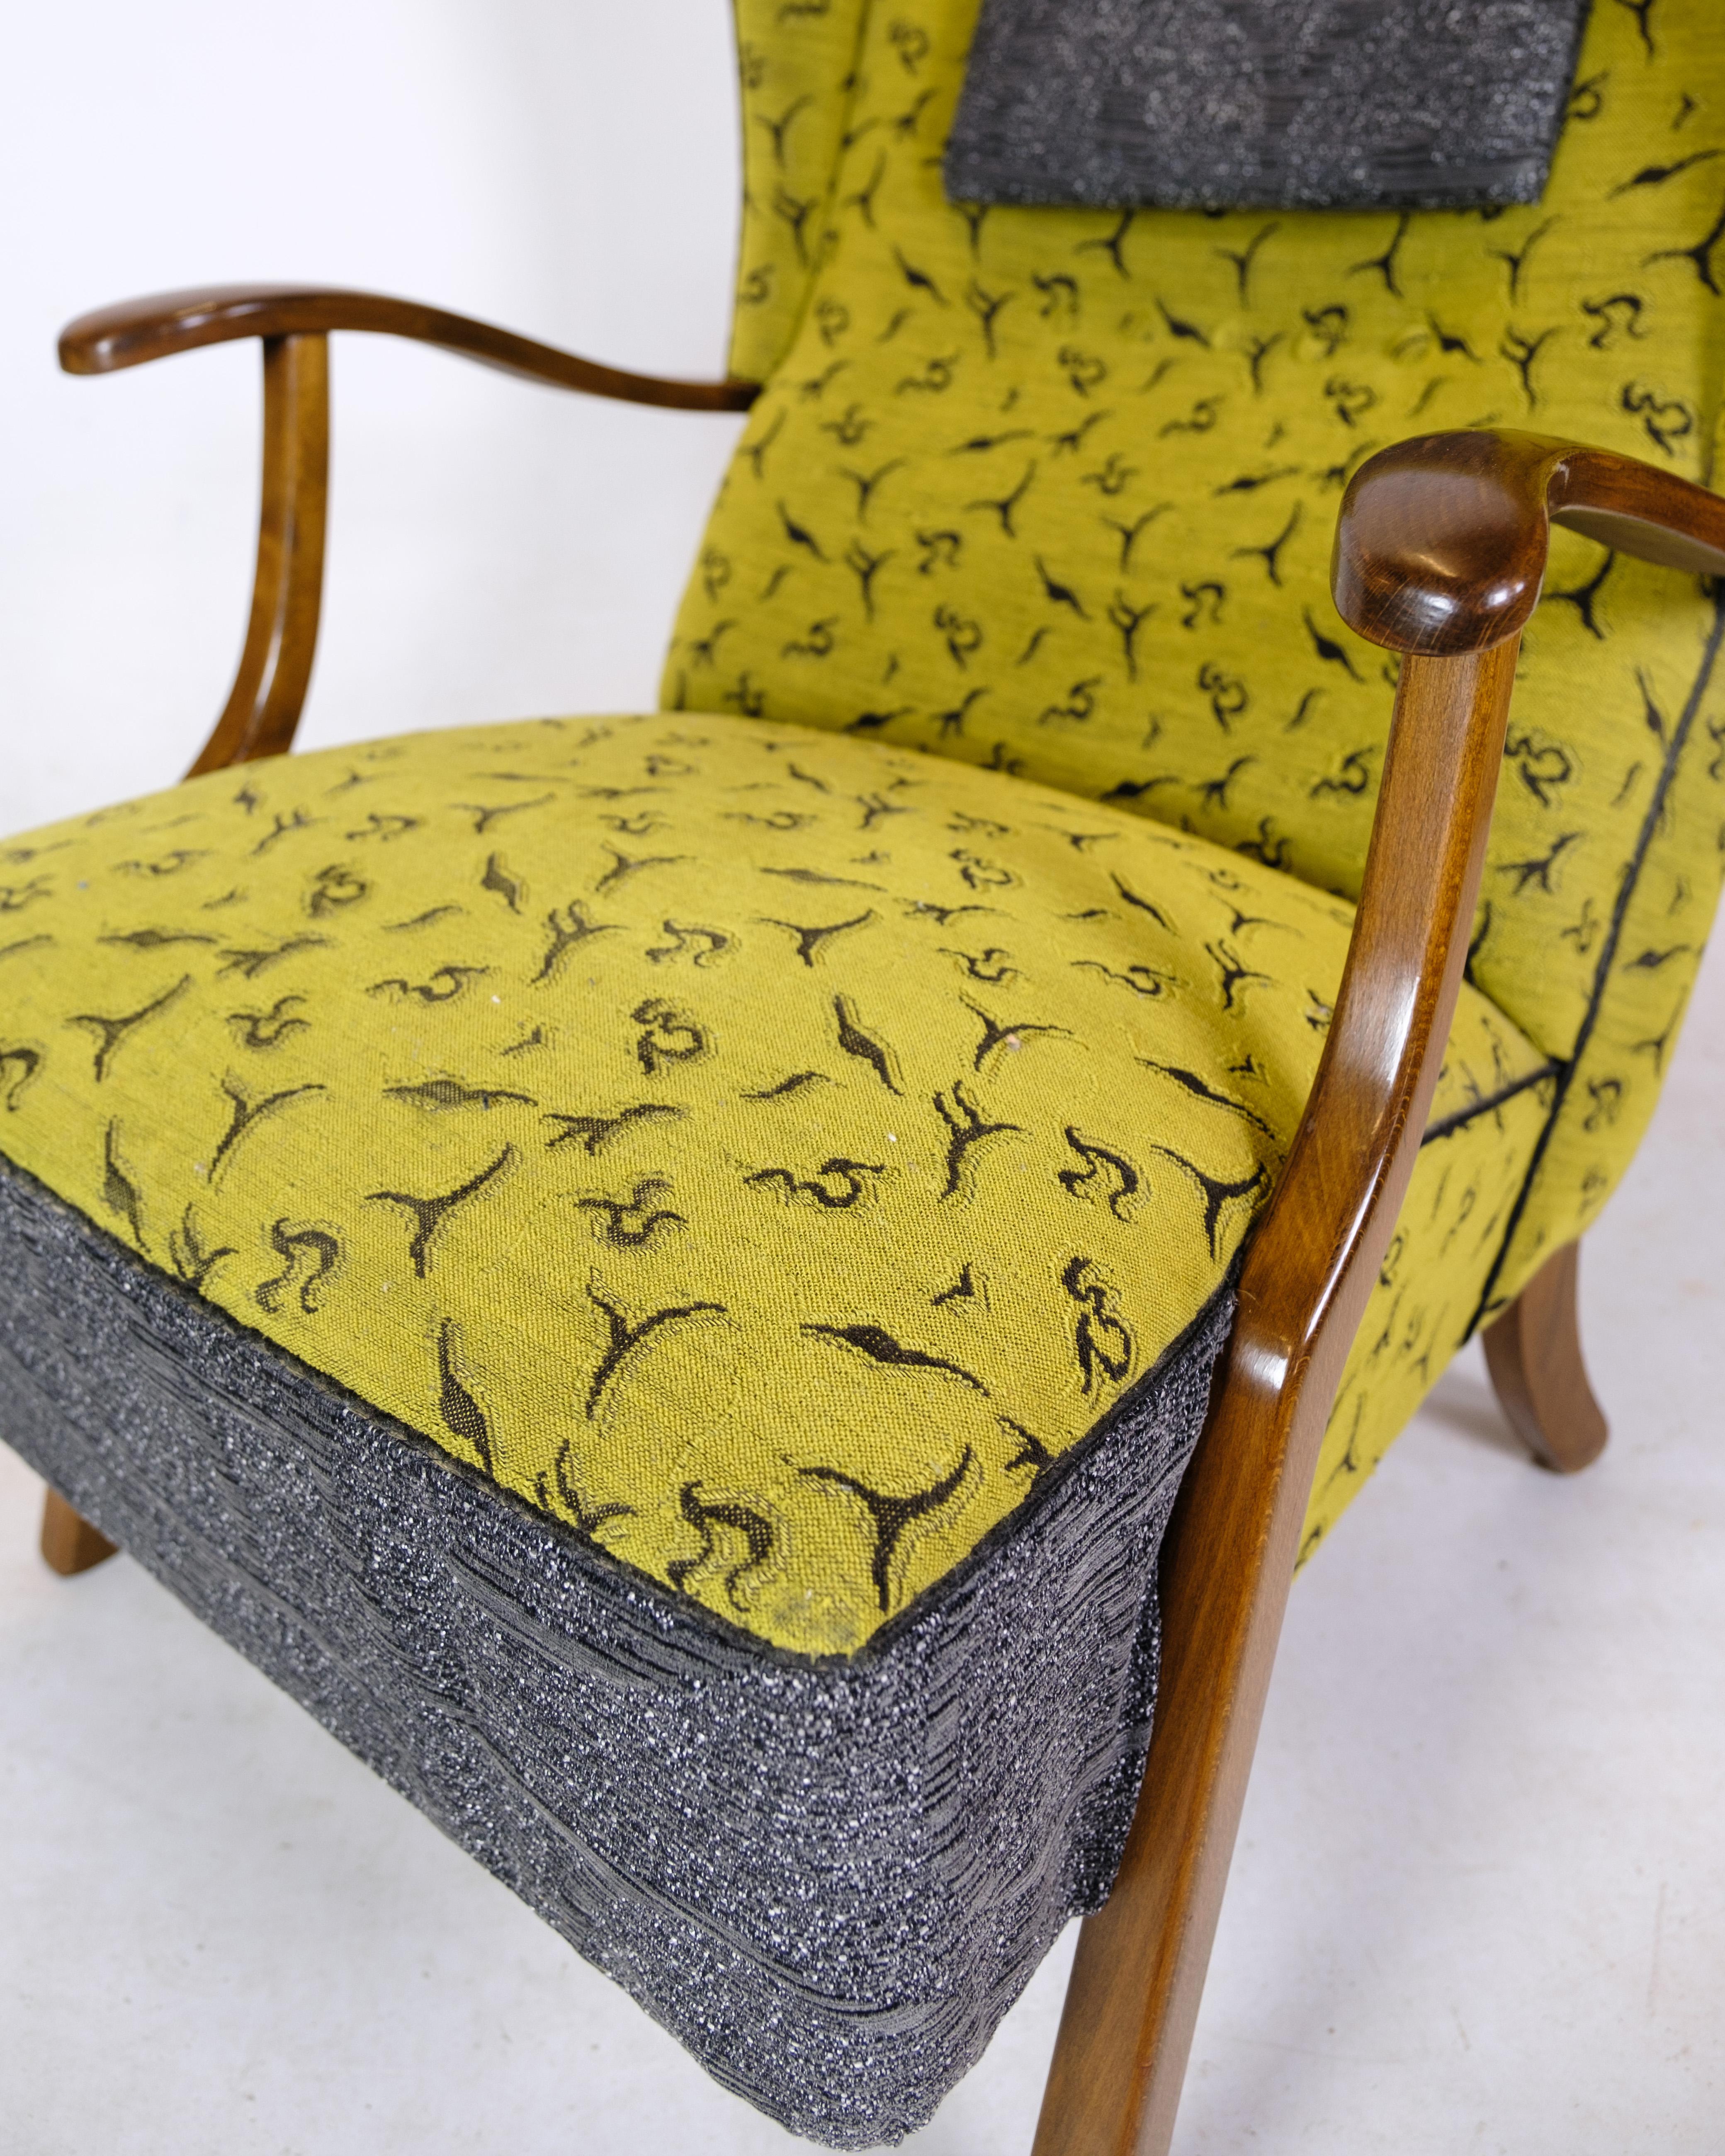 Armchair In Polished Nutwood By Danish Carpenter in Colorful fabric from 1940's For Sale 1